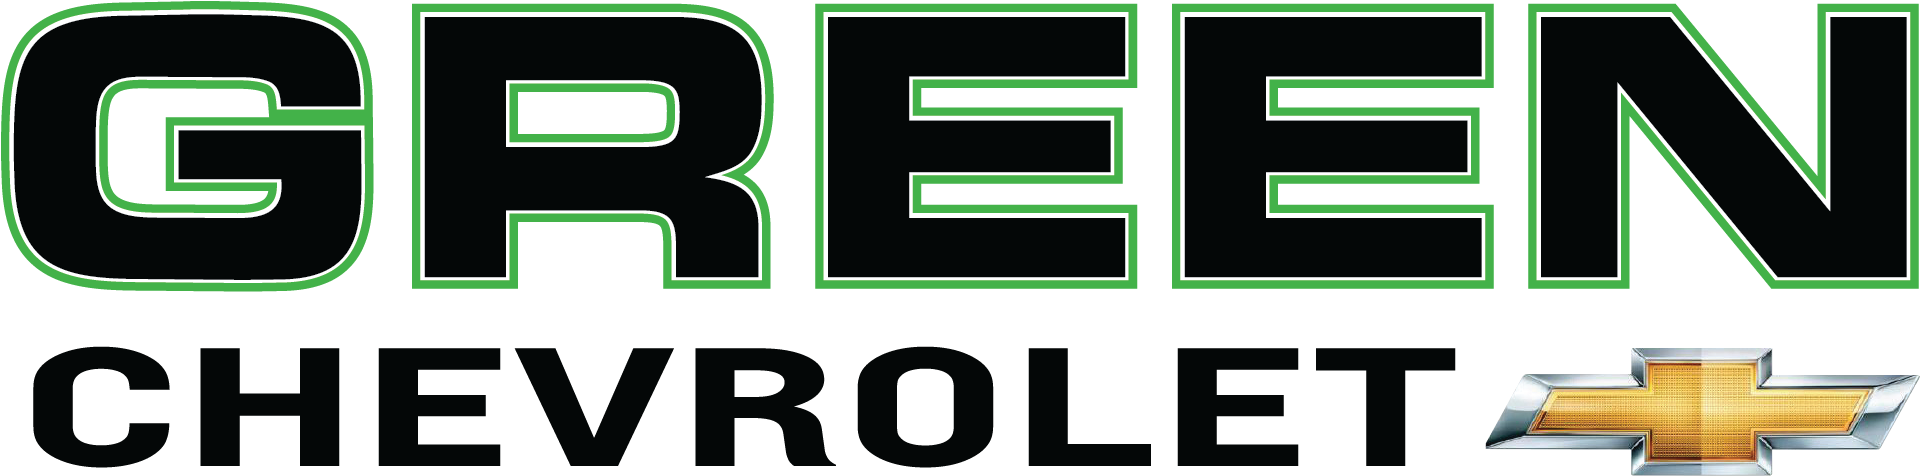 Green Chevrolet - Chevy (2112x558), Png Download